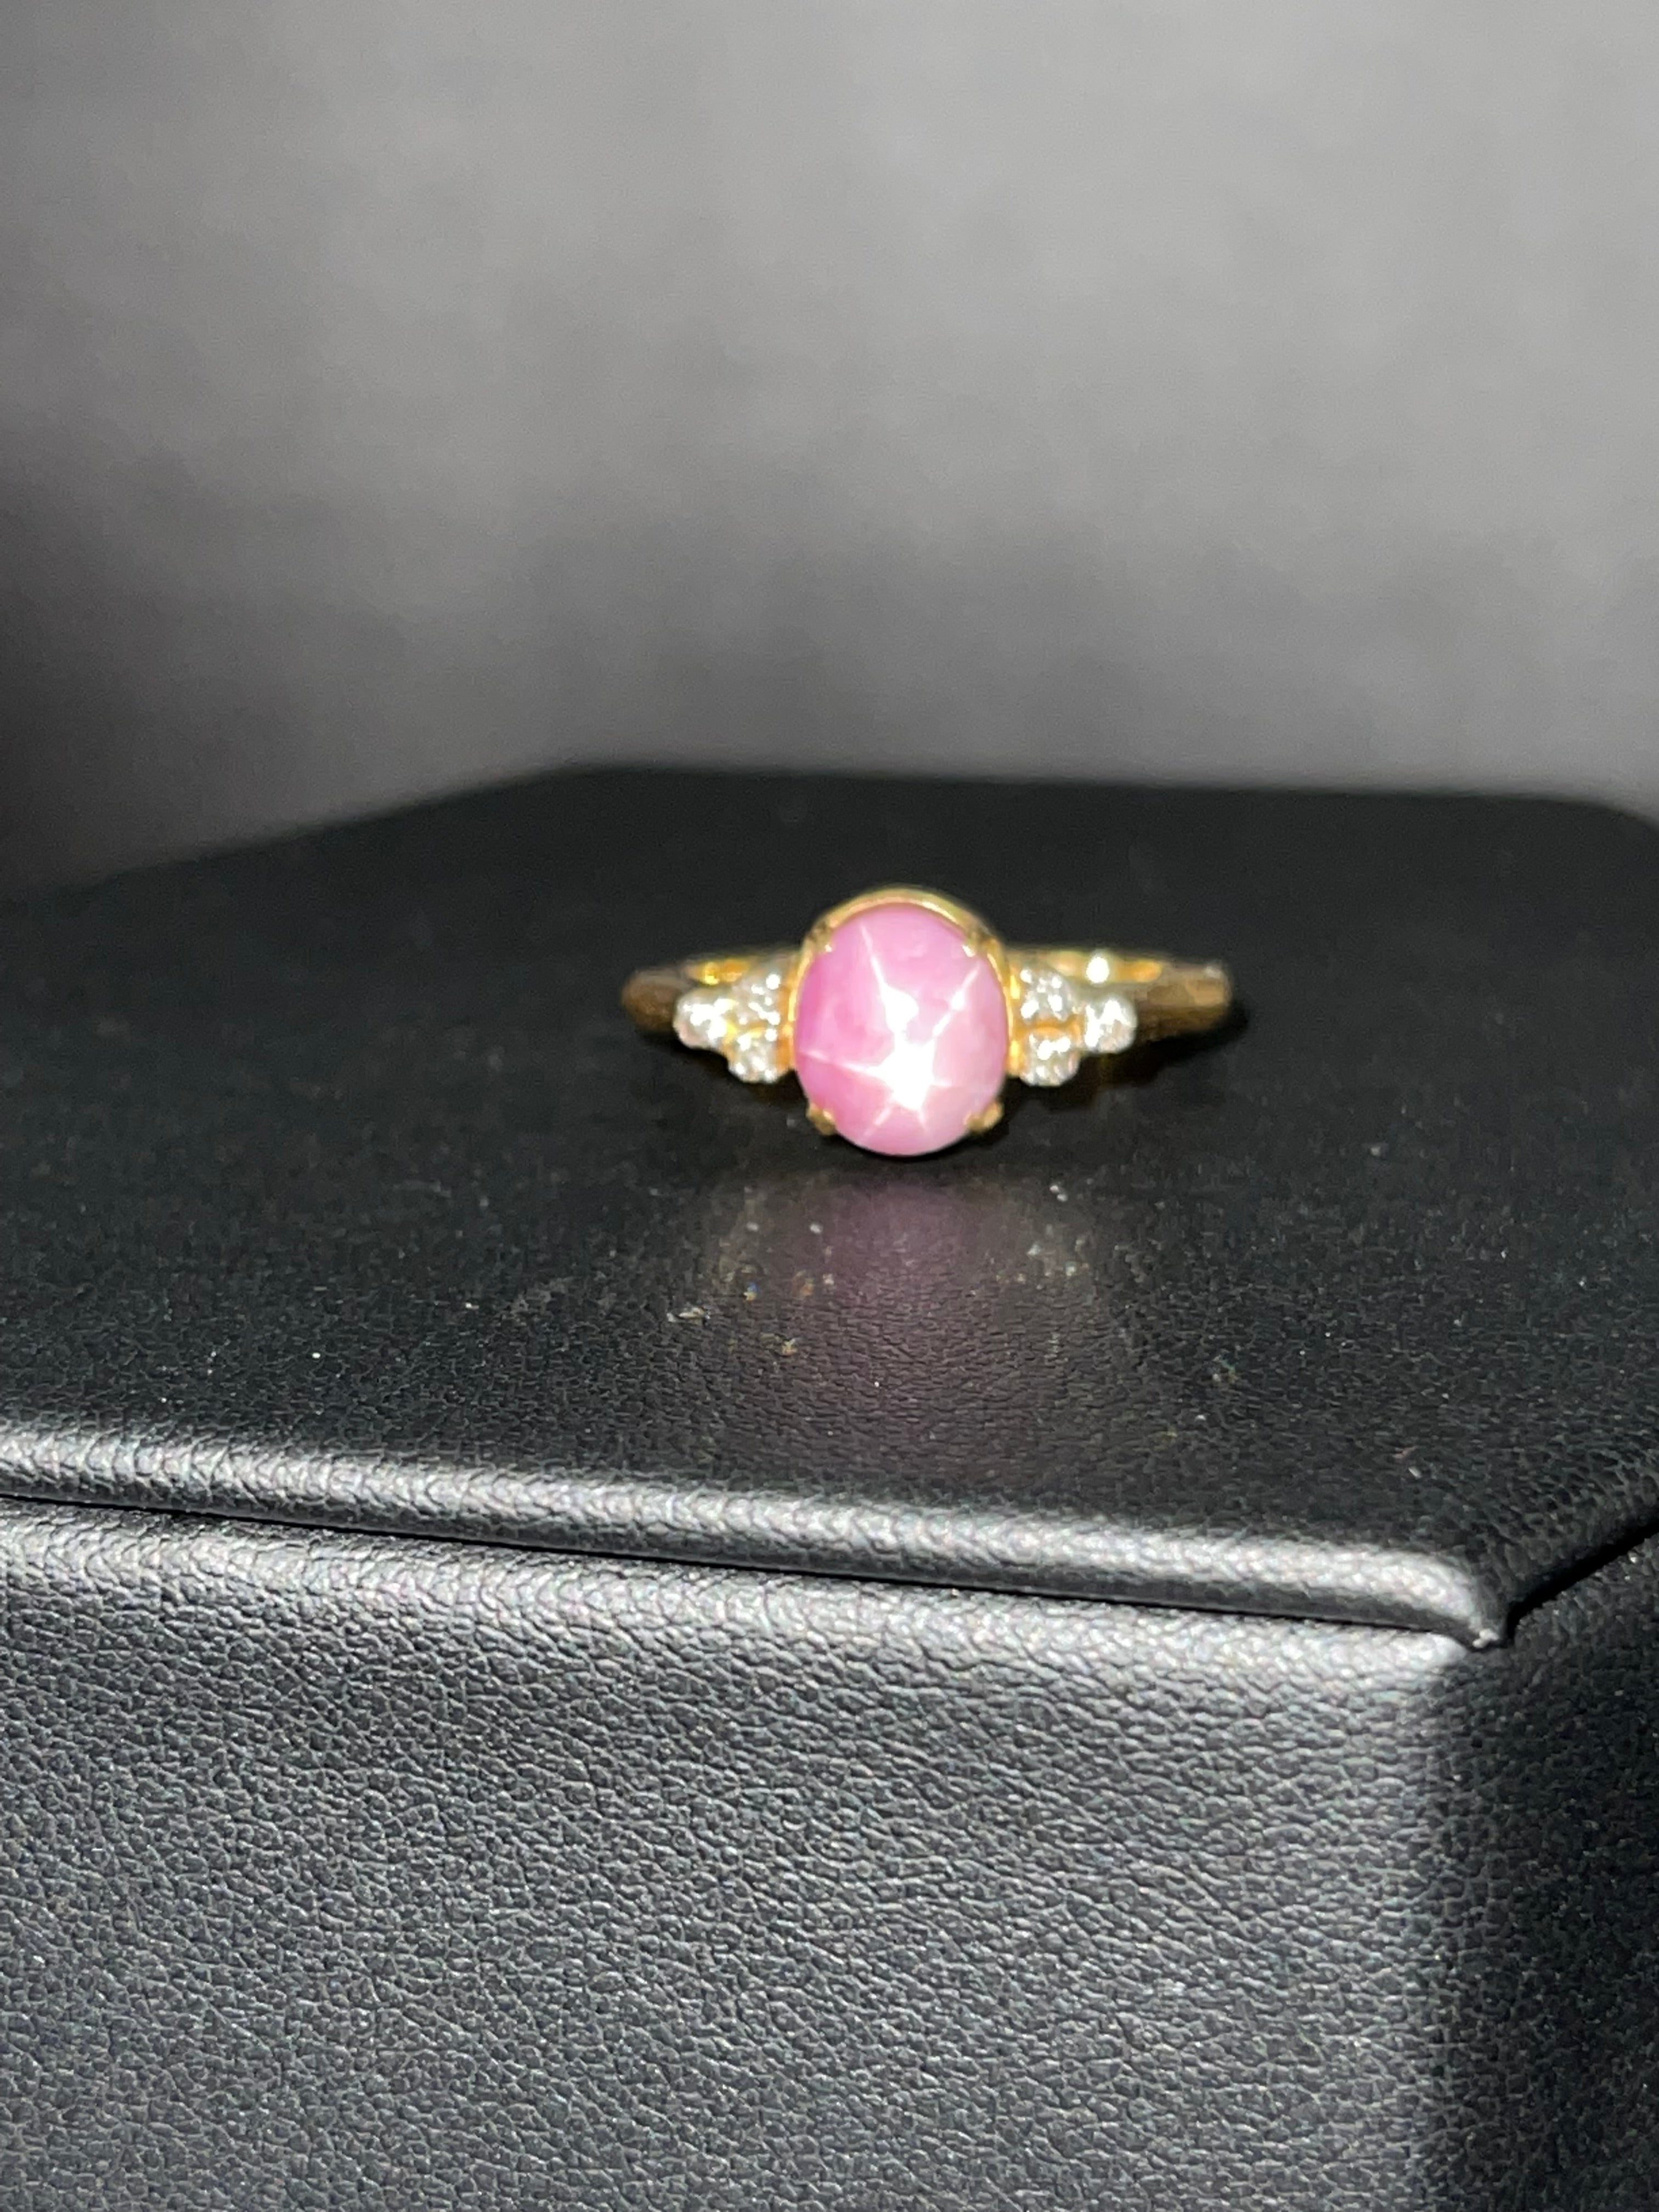 Sold at Auction: 14KT Gold, Pink Star Sapphire, and Diamond Ring